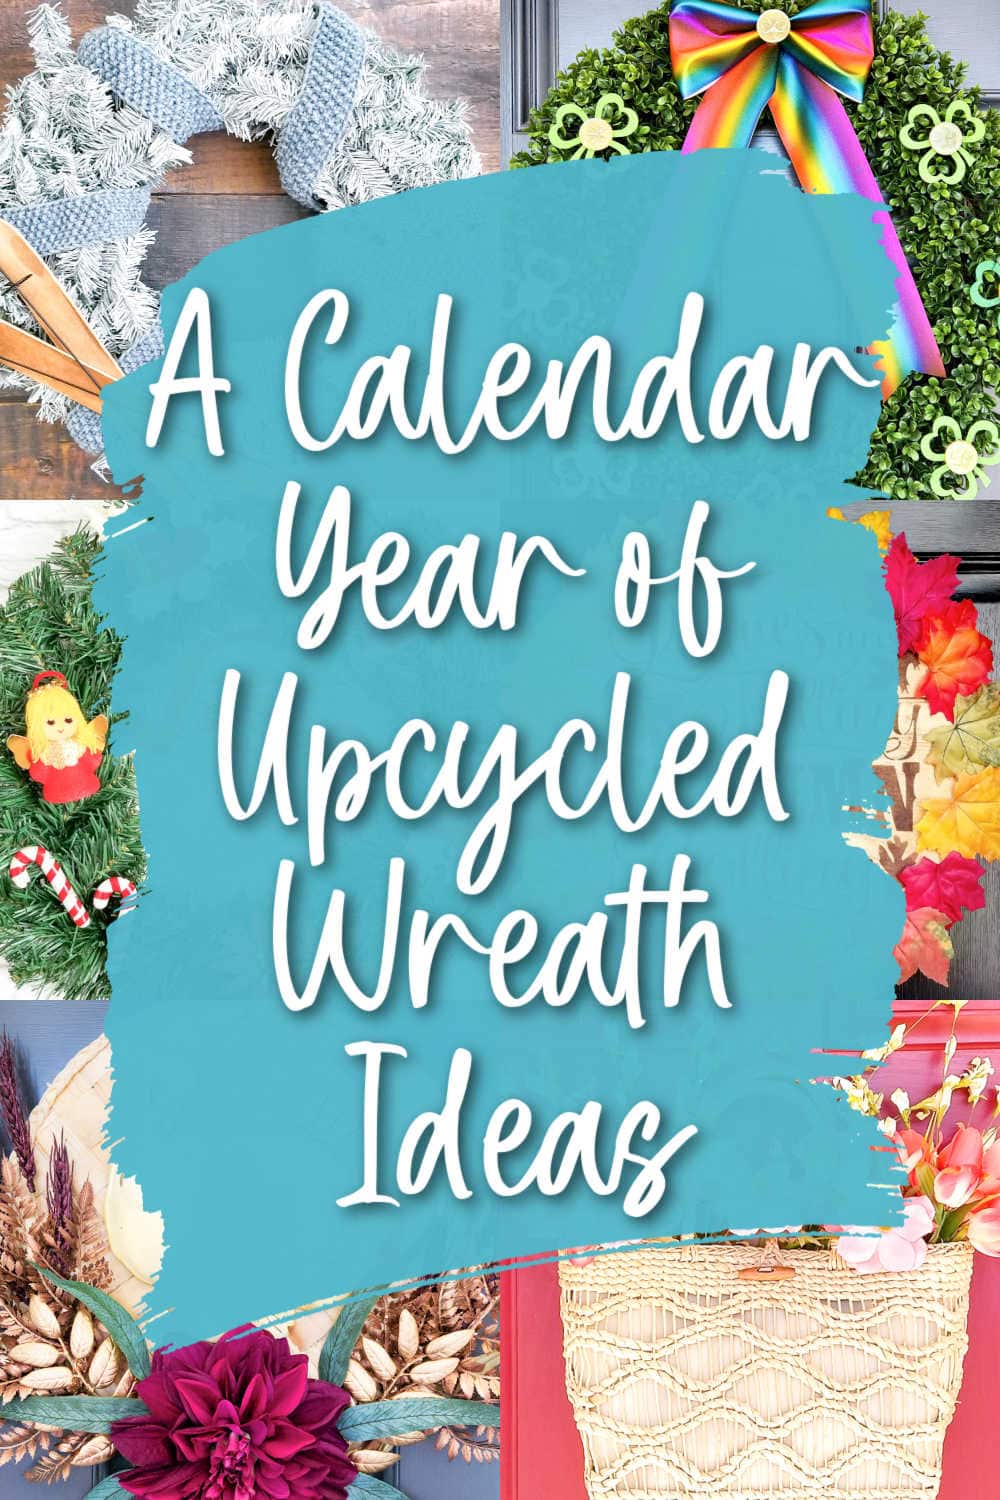 upcycled wreaths and project ideas